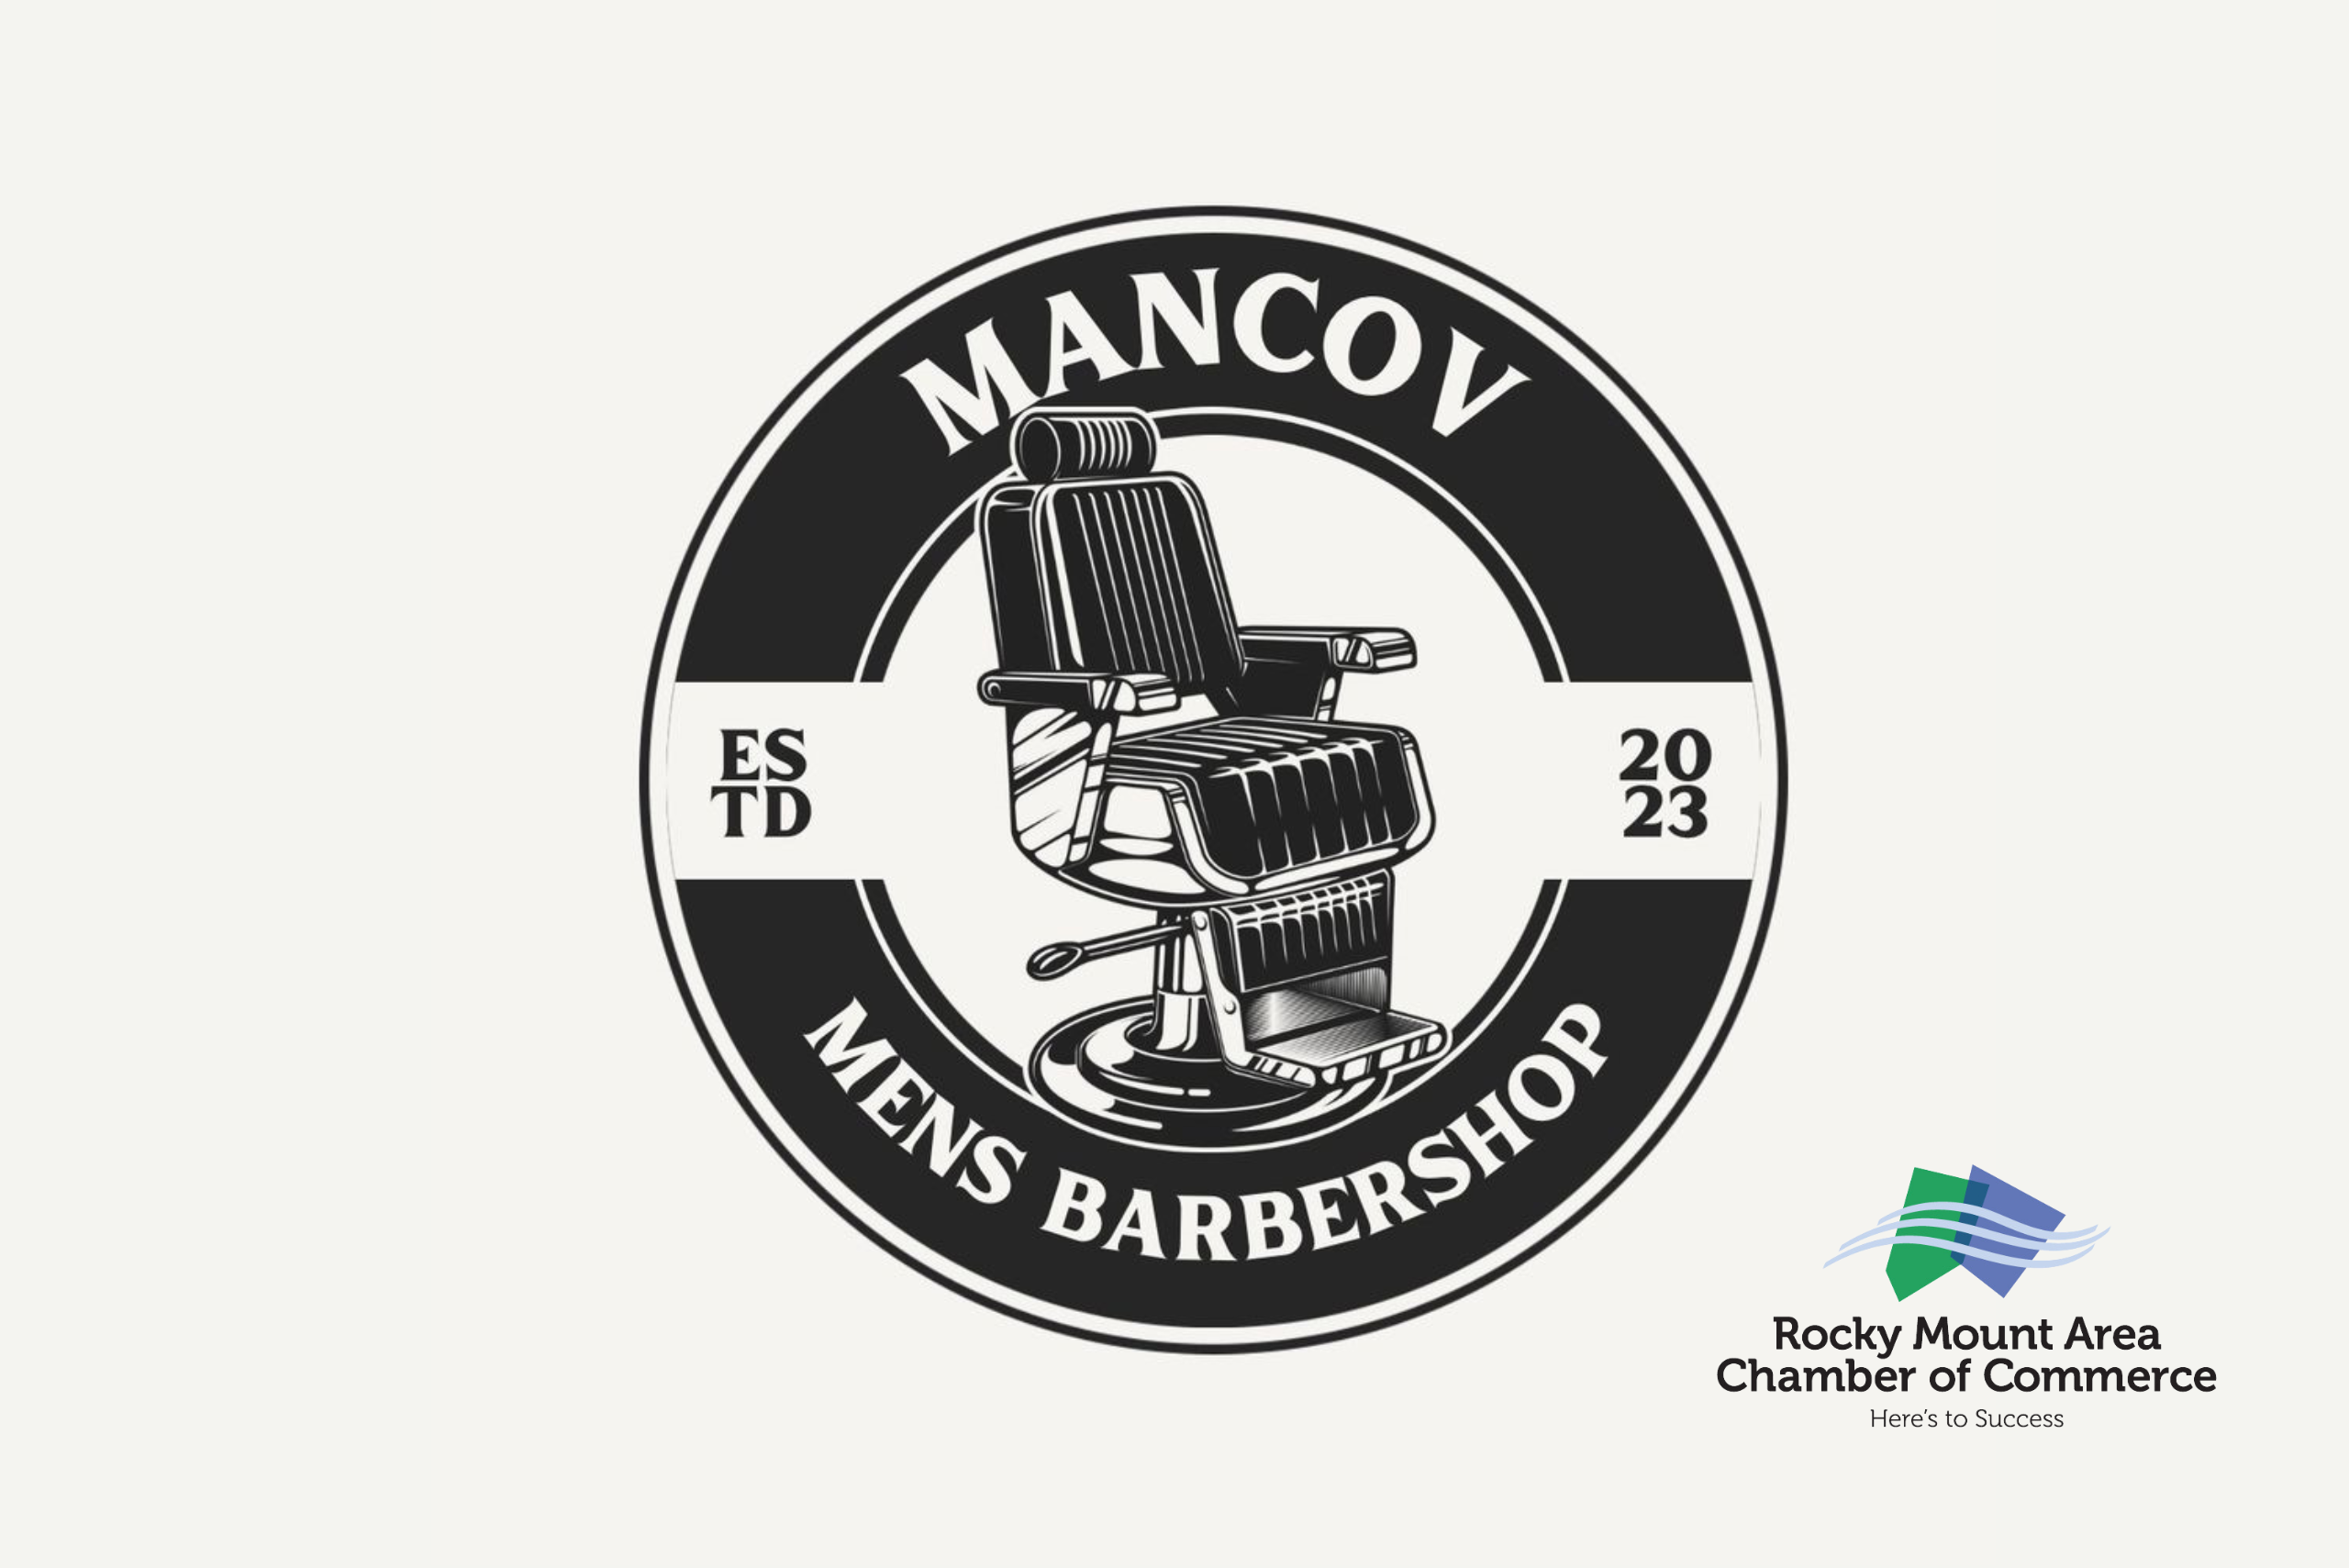 Small Business of the Month Presentation - Mancov Barbershop